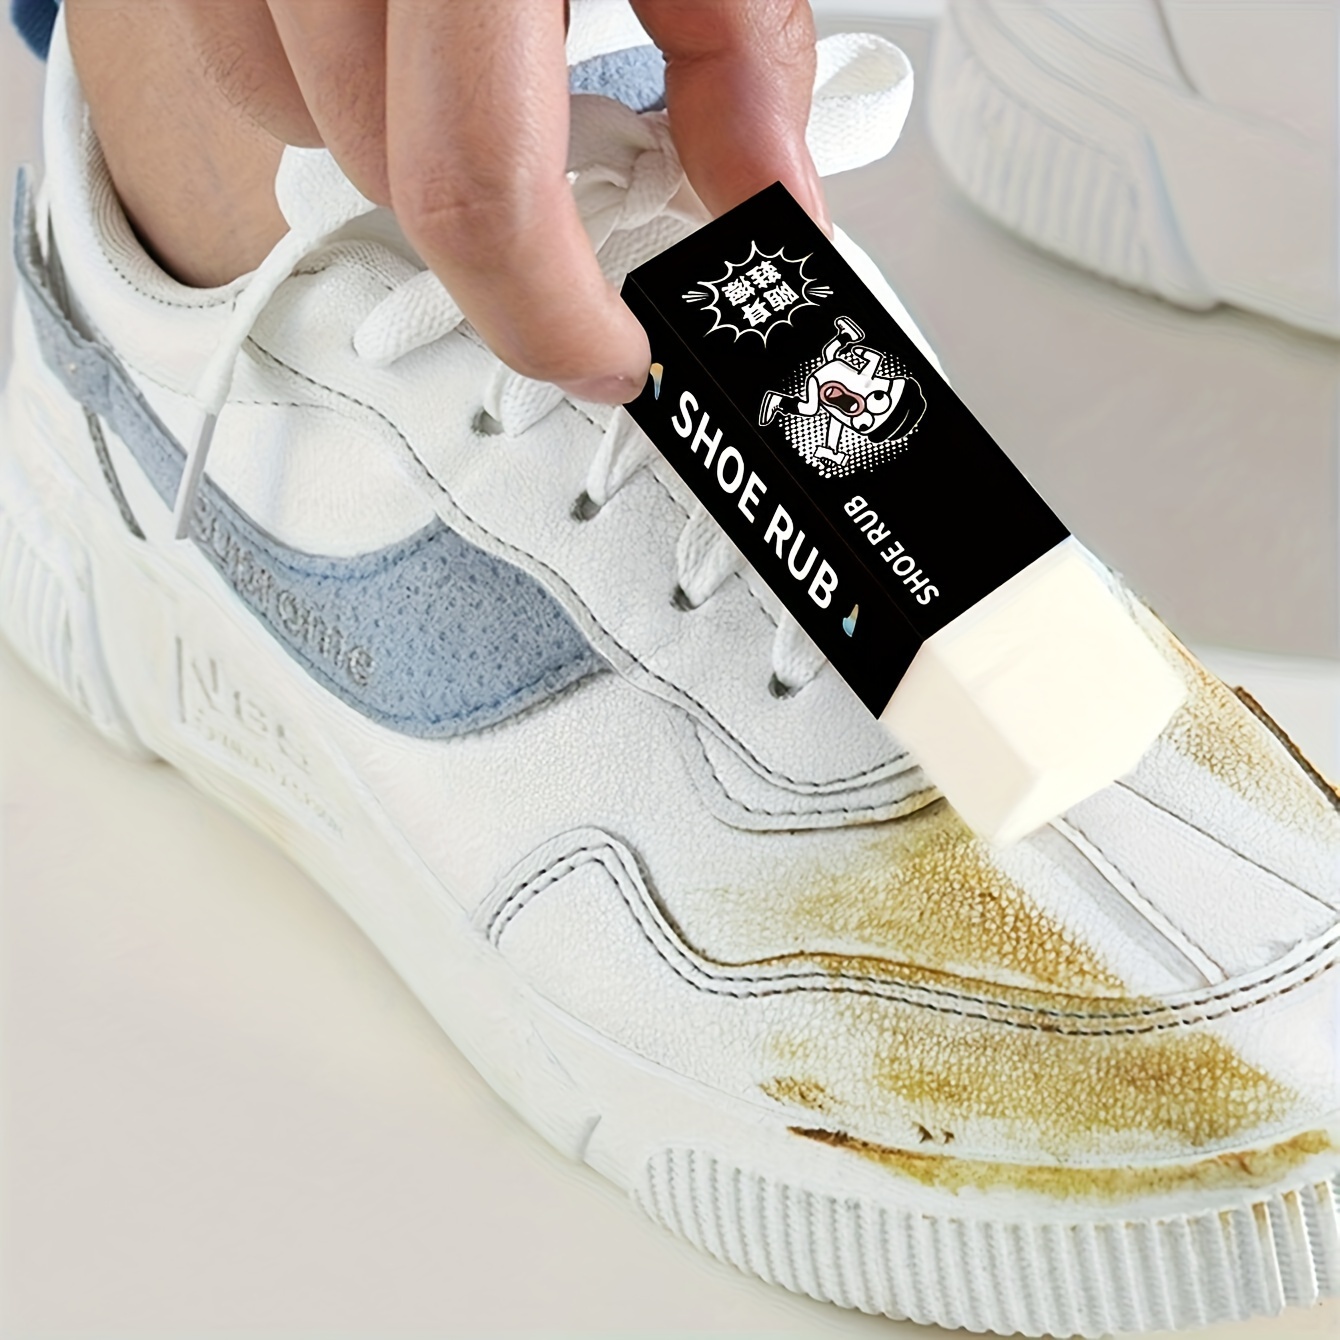 1pc White Shoes Sneakers Cleaner Whiten Refreshed Polish Cleaning Tool For  Casual Leather Shoe Sneakers Brush Cleaning